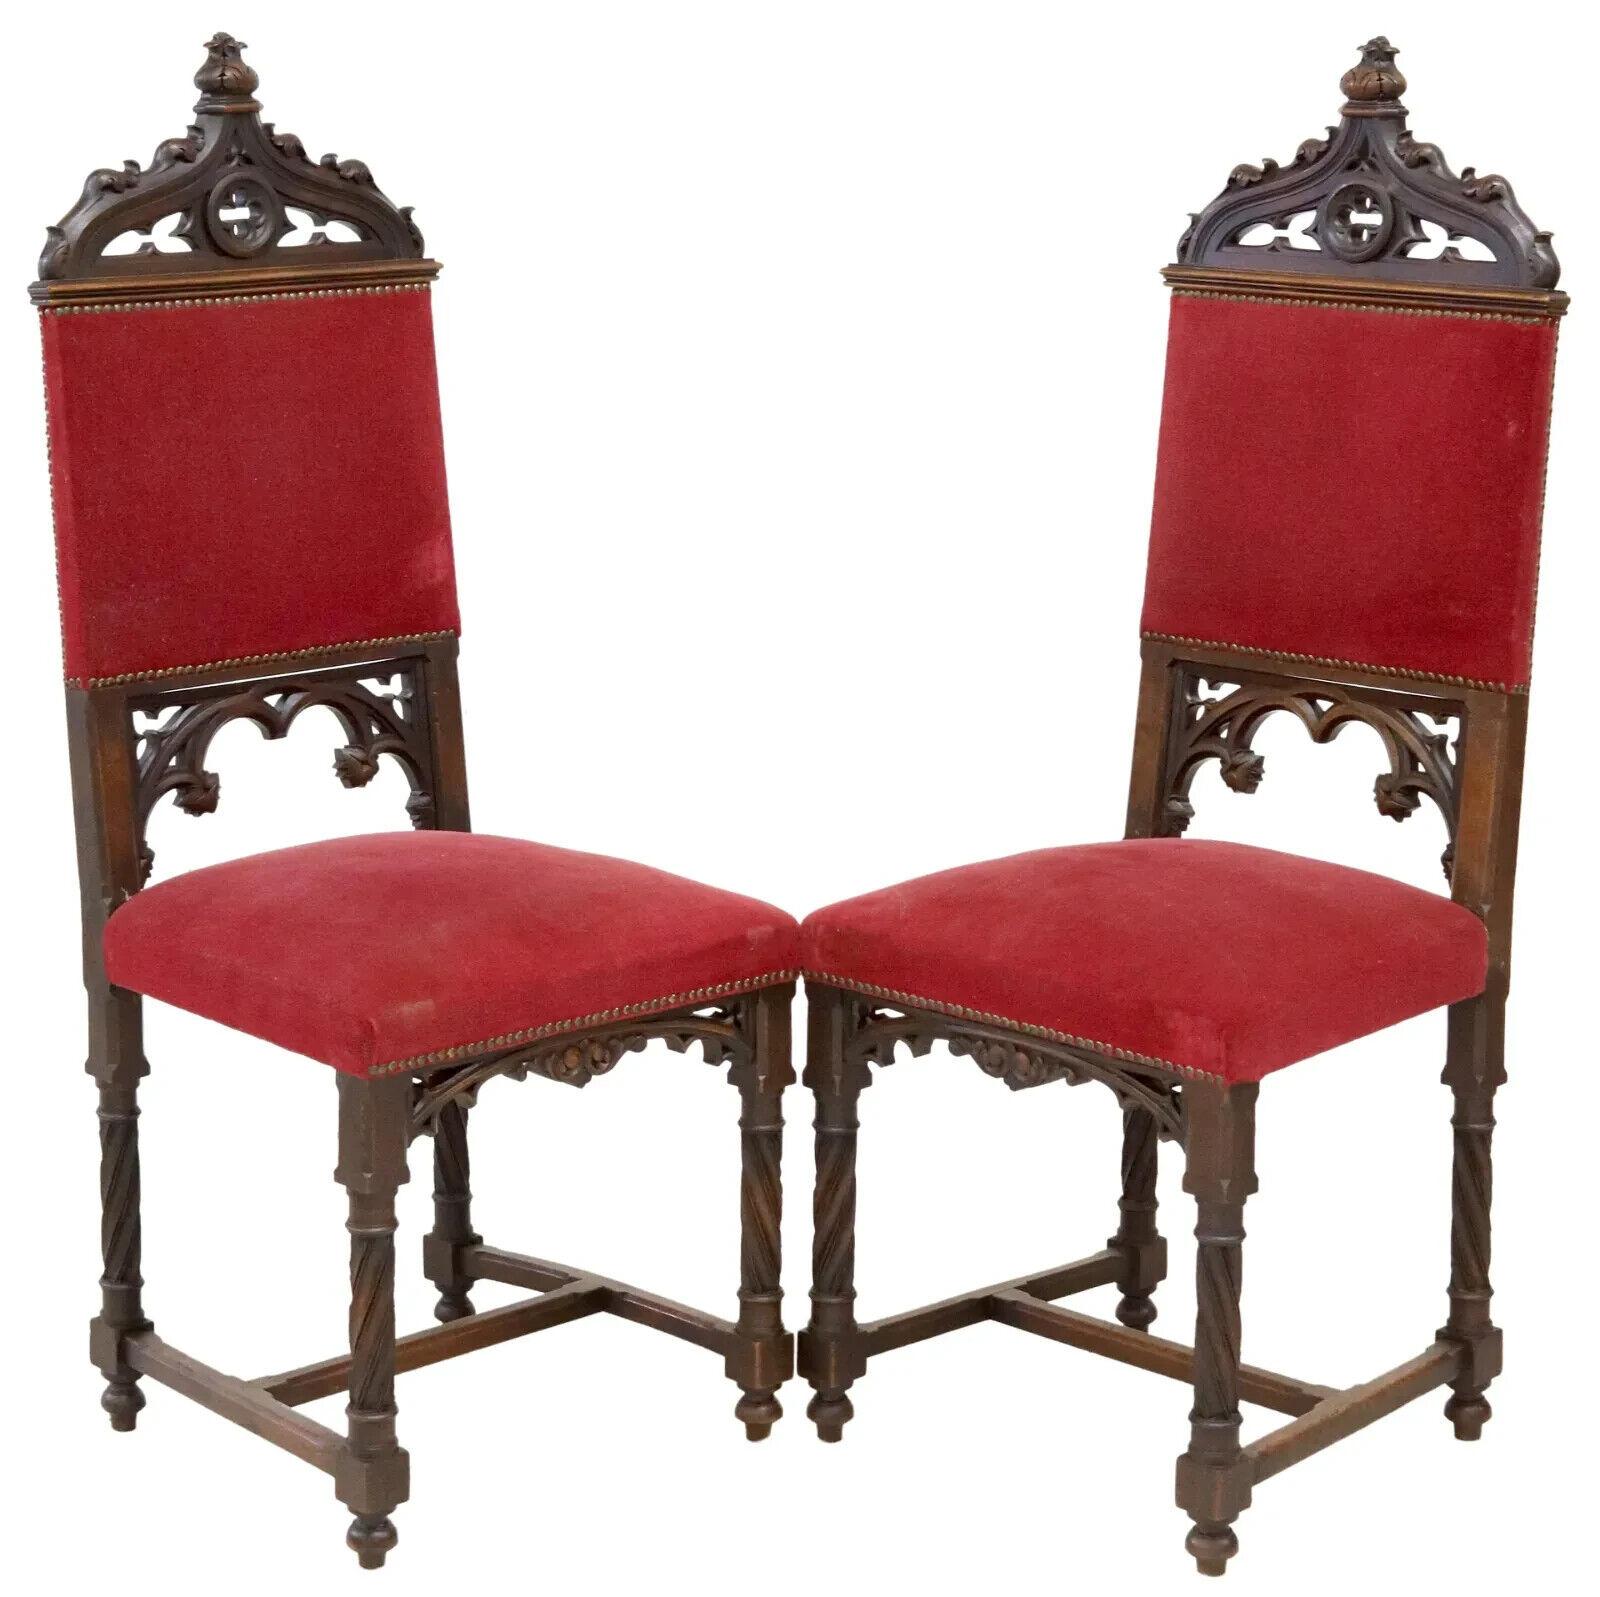 
Beautiful Antique Chairs, Side, (8) French Gothic Revival, Carved, Red, Early 1900s, 20th Century!!

Lot of 8 French Gothic Revival side chairs, early 20th c., having carved tracery, red upholstery, joined by H stretcher, rising on twist supports,